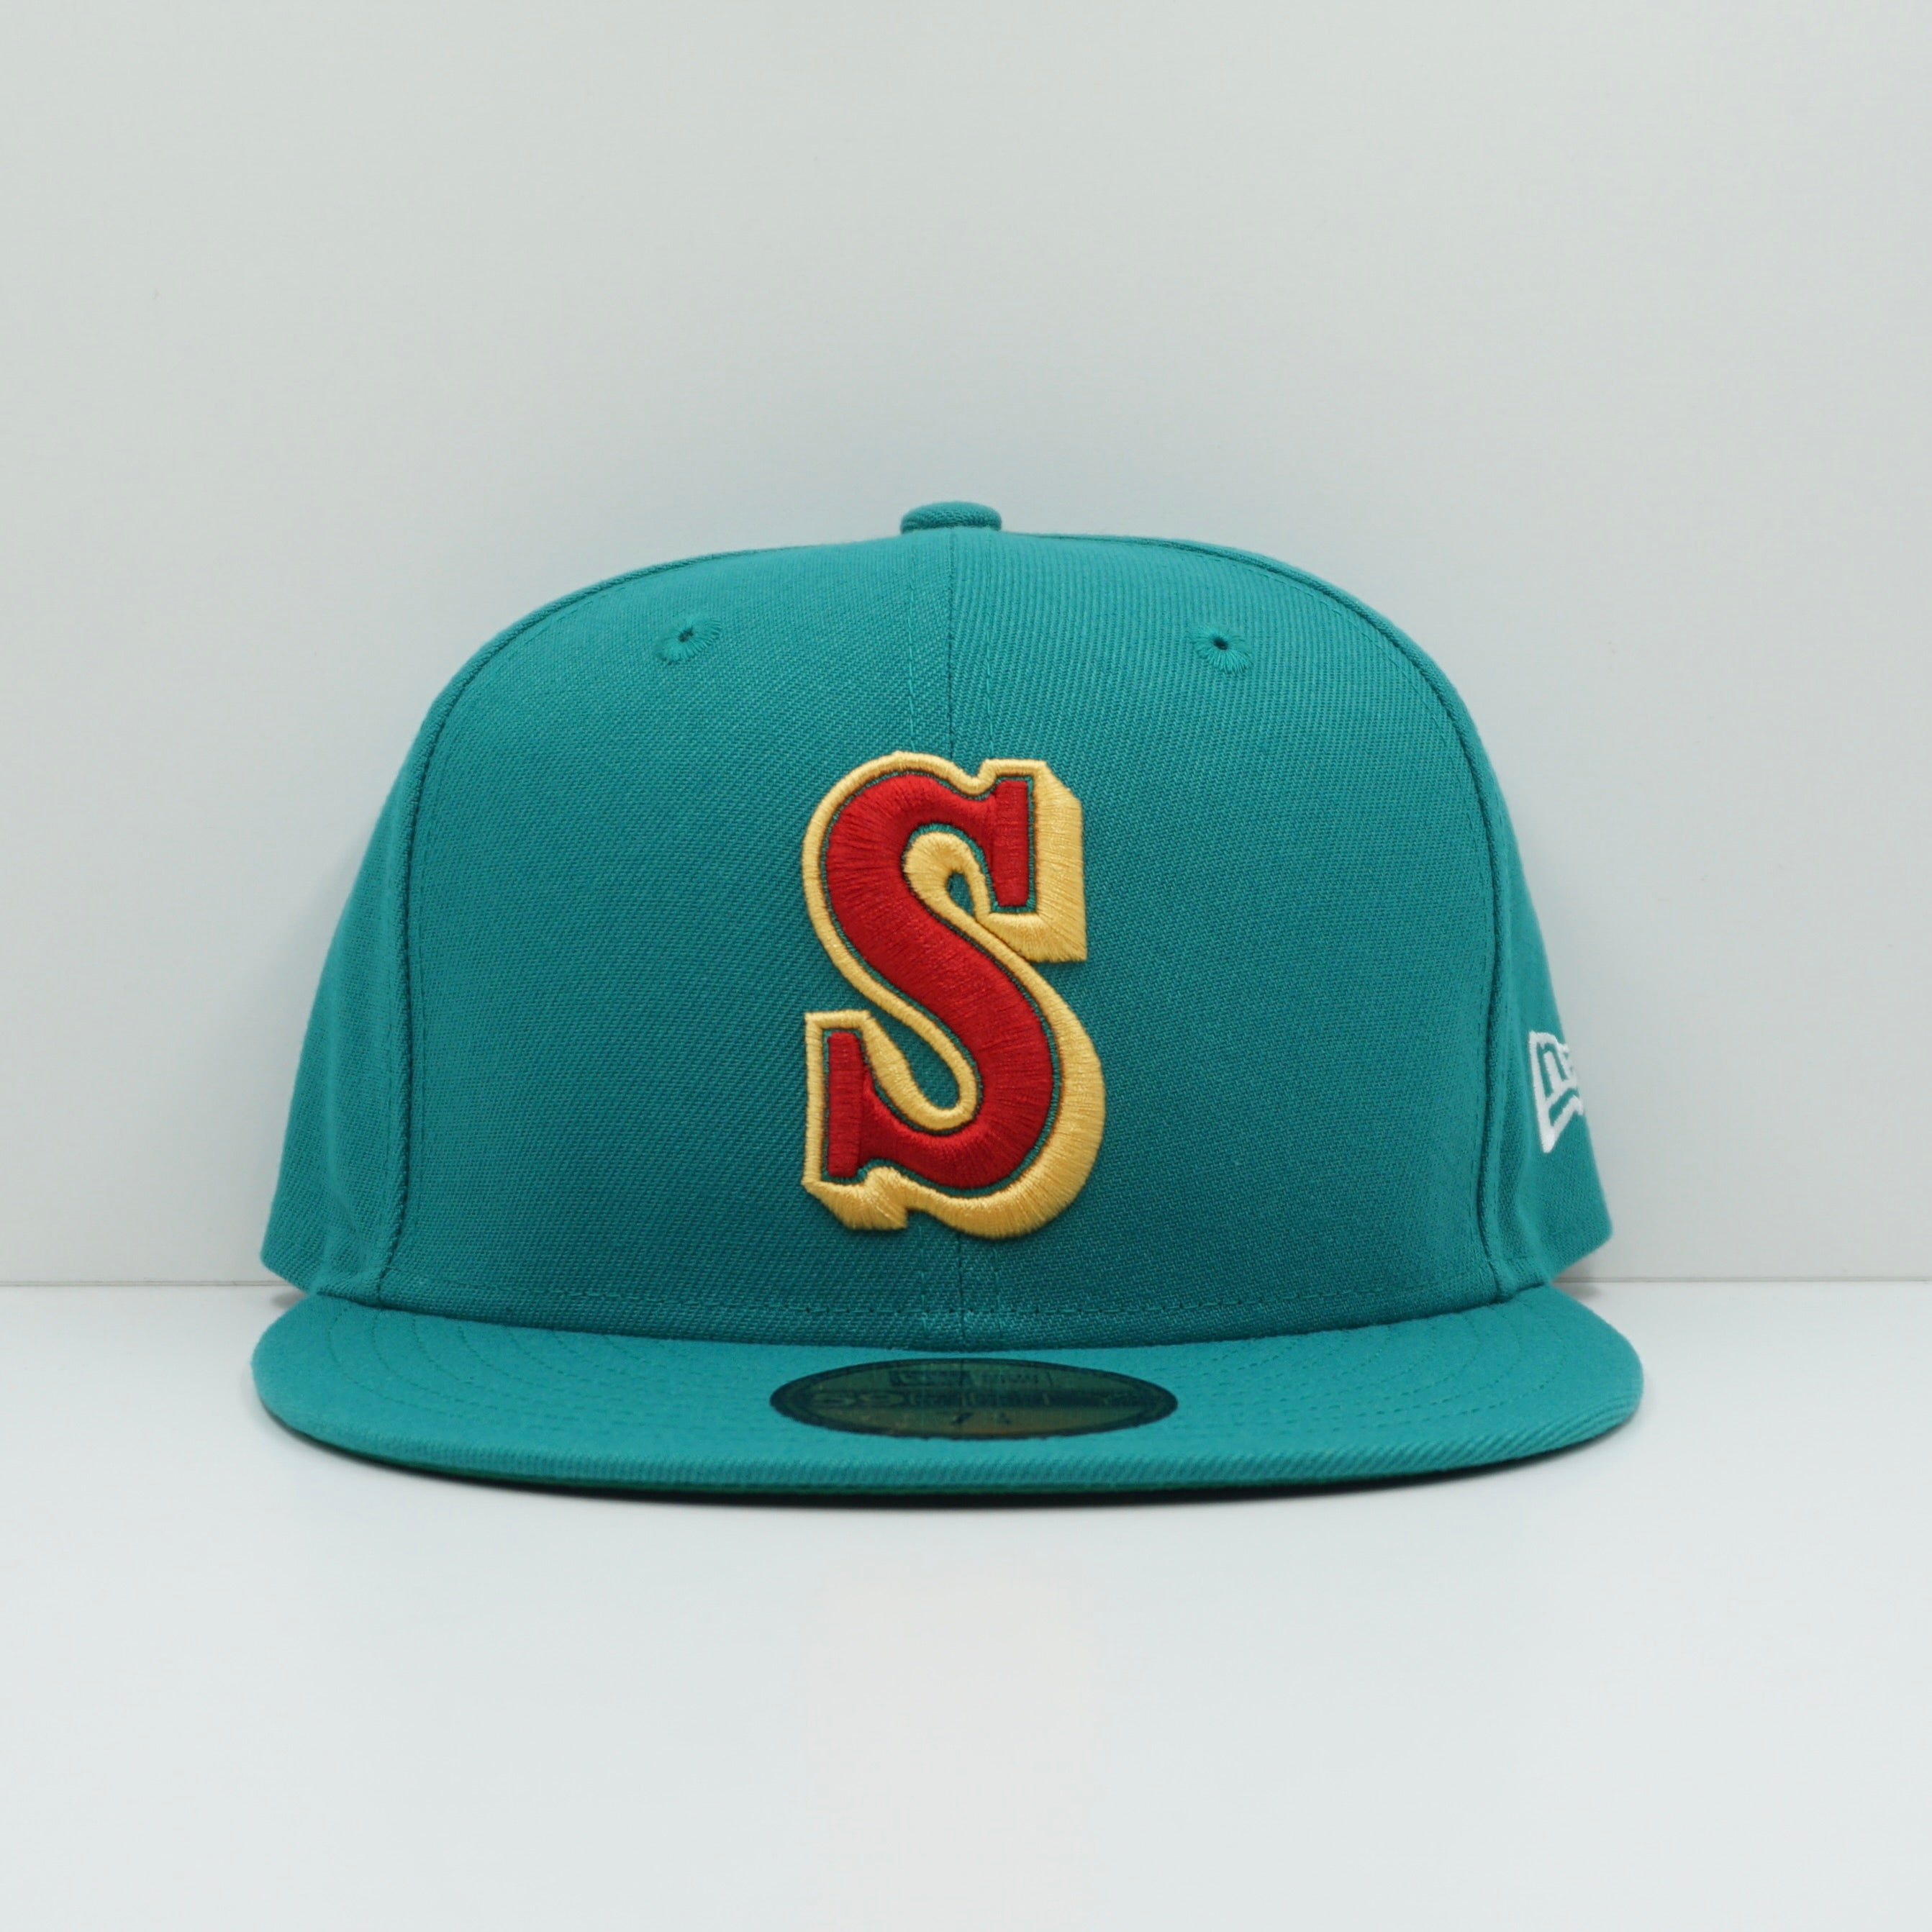 New Era Cooperstown Seattle Seahawks Fitted Cap